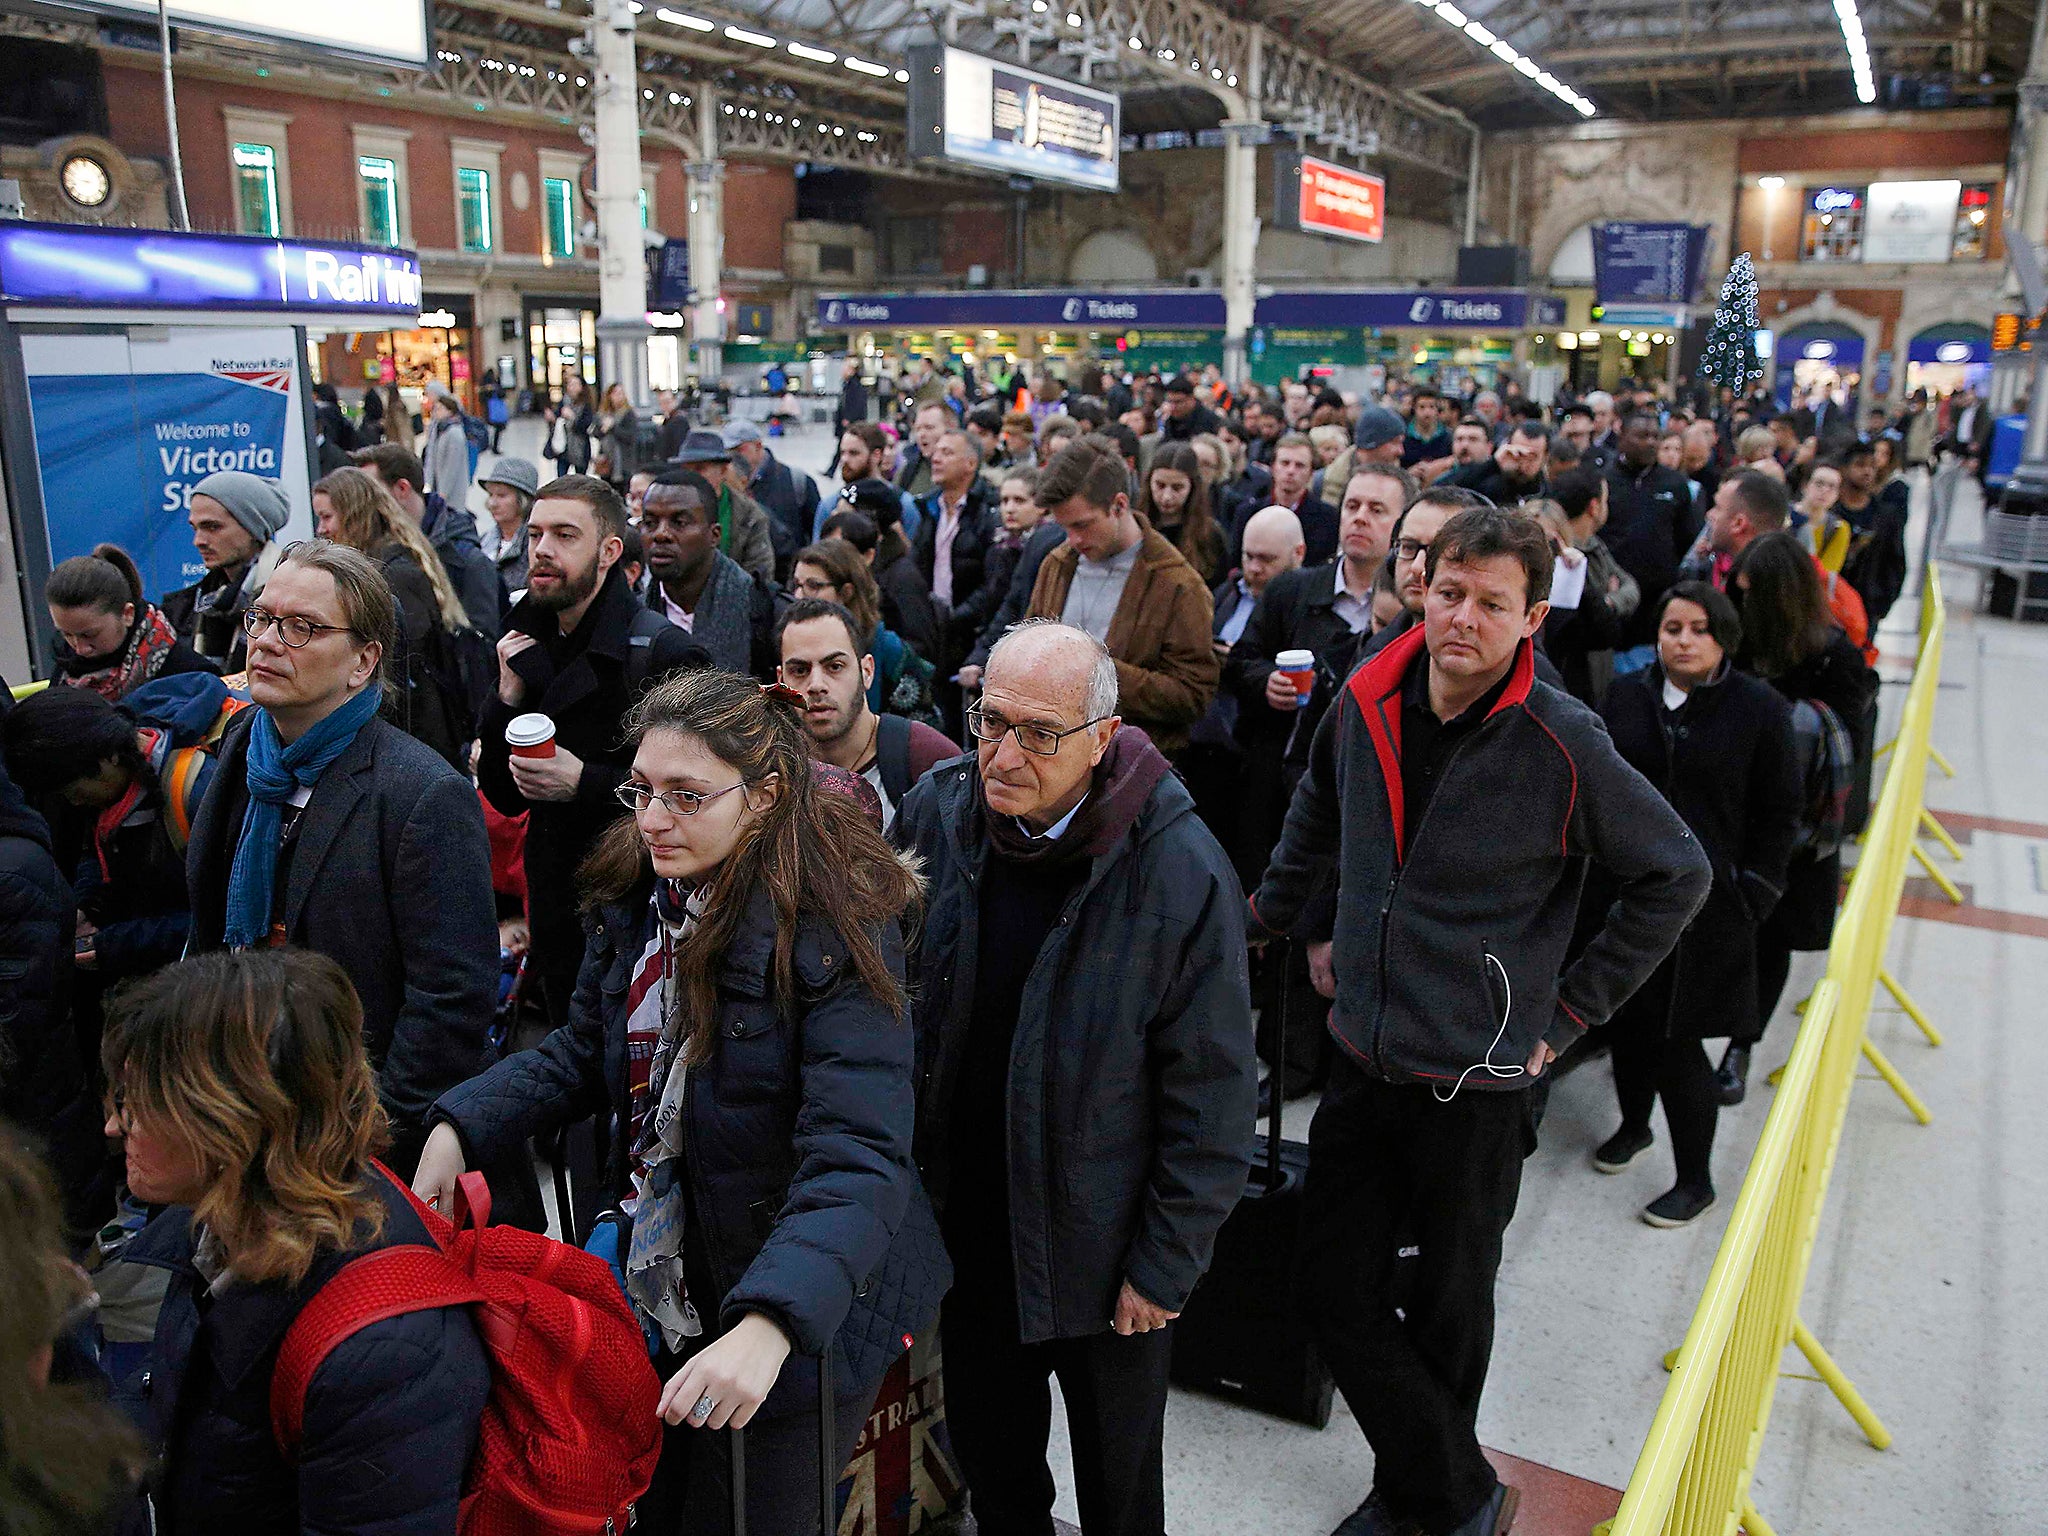 Passengers queue for a reduced Gatwick Express service during the Southern railway strike at Victoria station in London